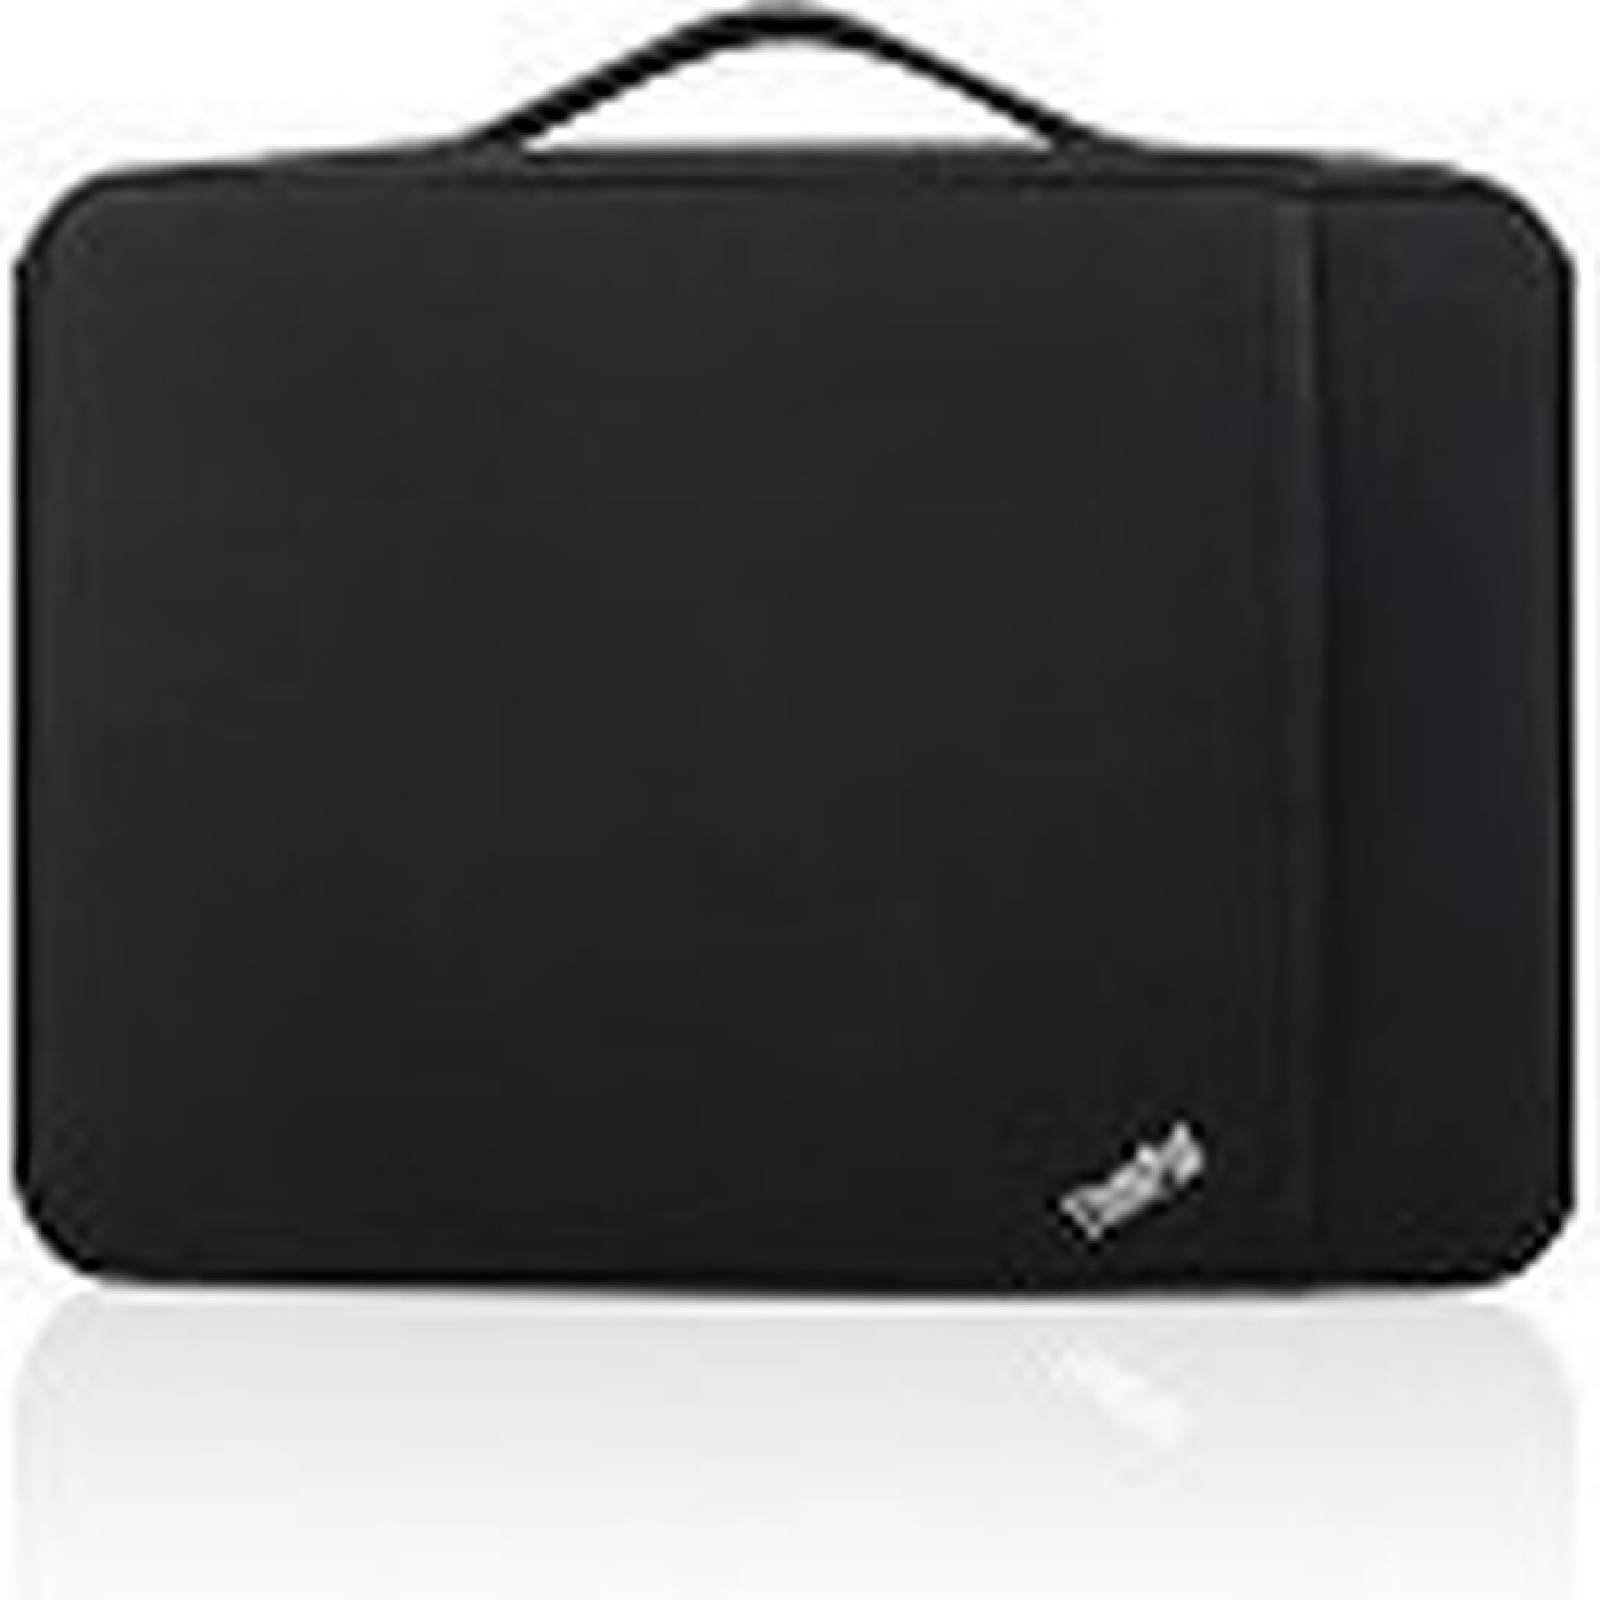 Lenovo Carrying Case (Sleeve) for 14 Notebook  Black